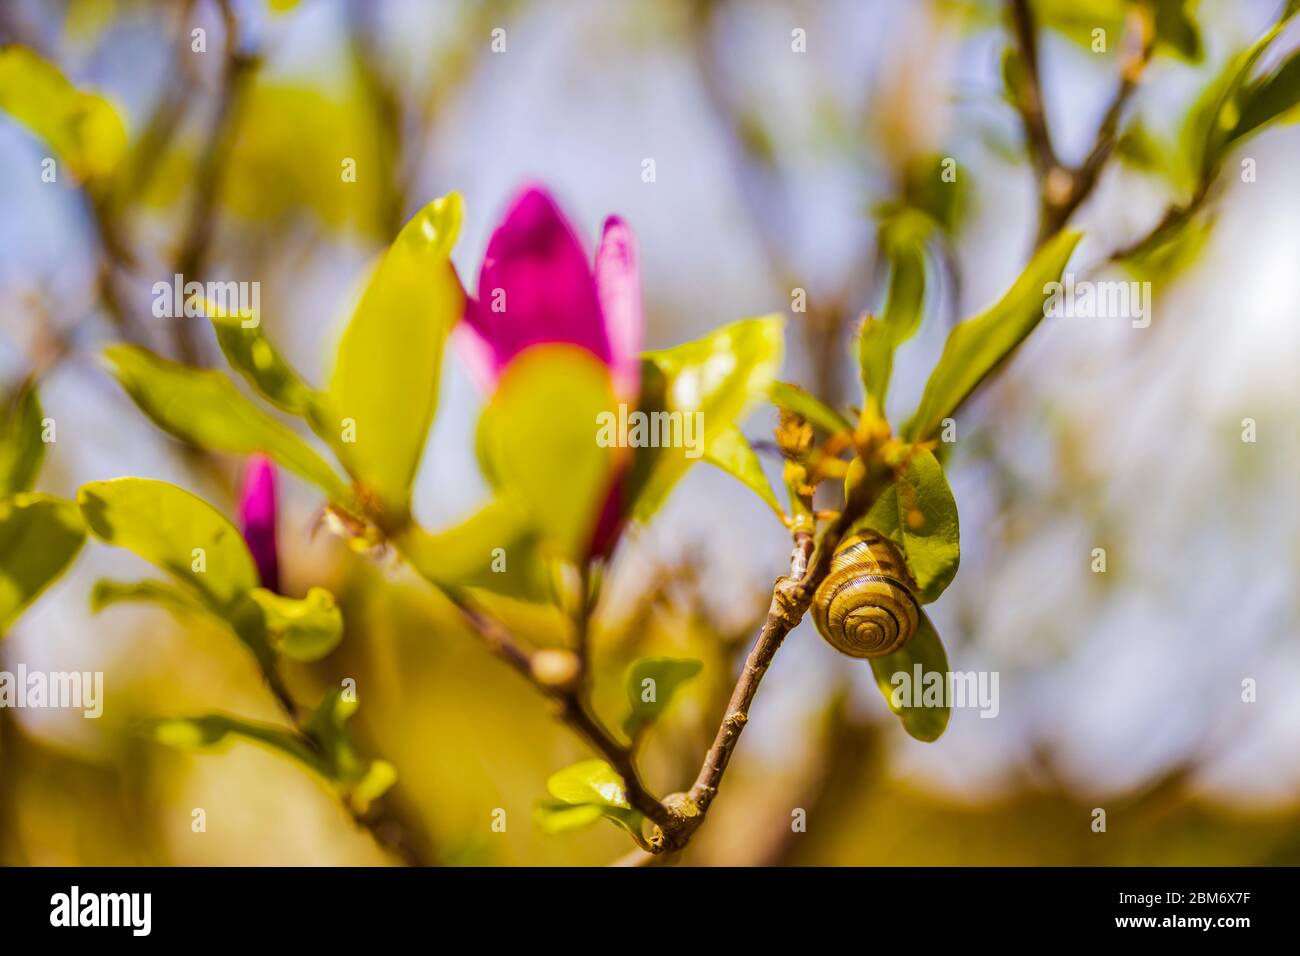 Magnolia flower bloom on background of blurry Magnolia flowers on Magnolia tree. Stock Photo